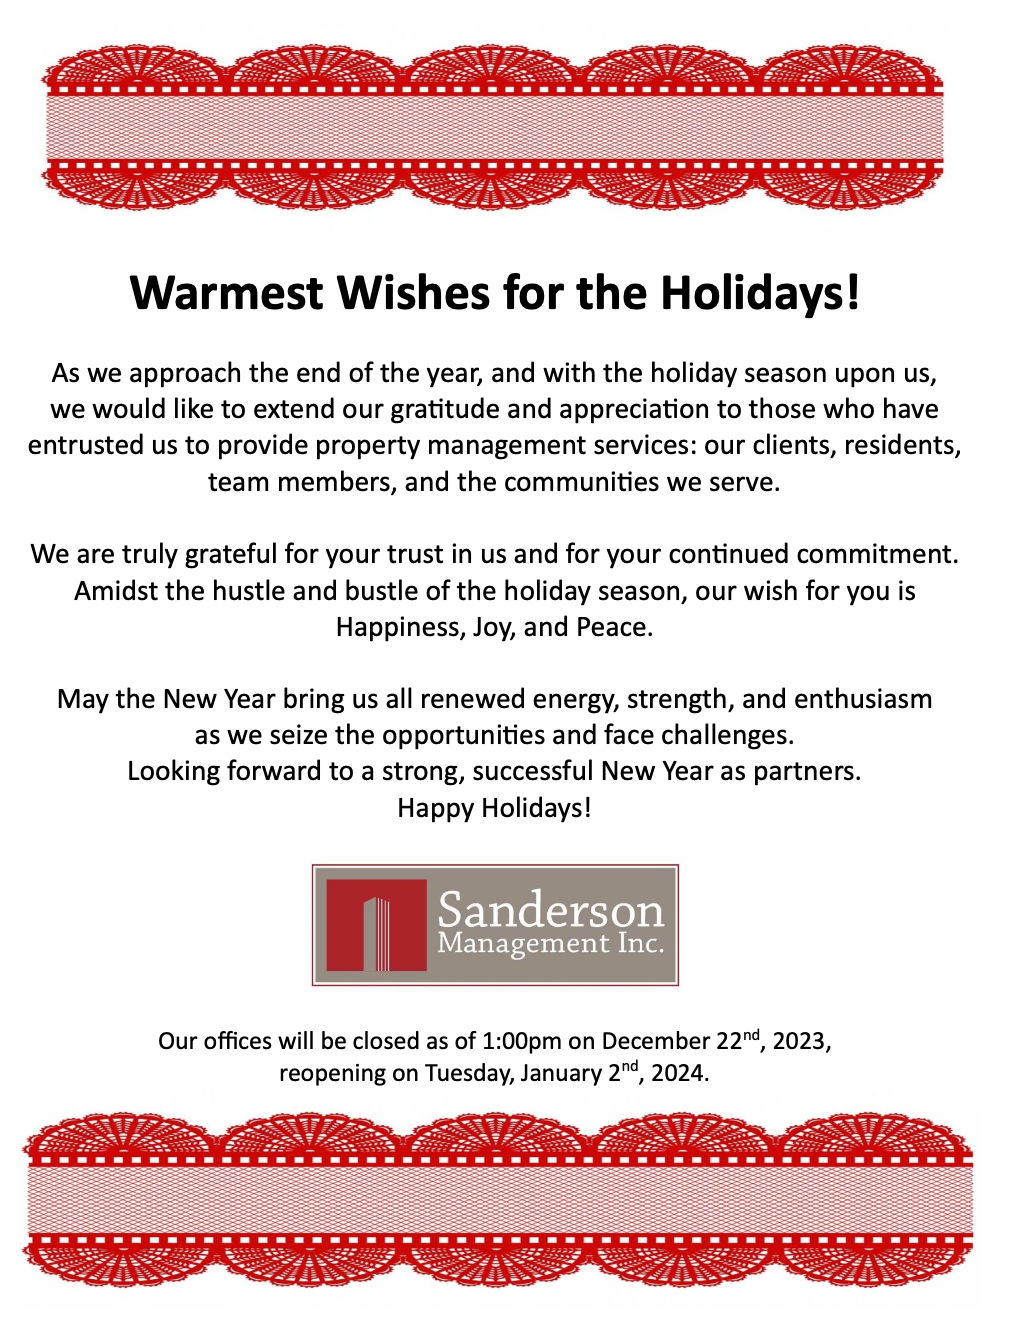 Image for warmest-wishes-for-the-holidays